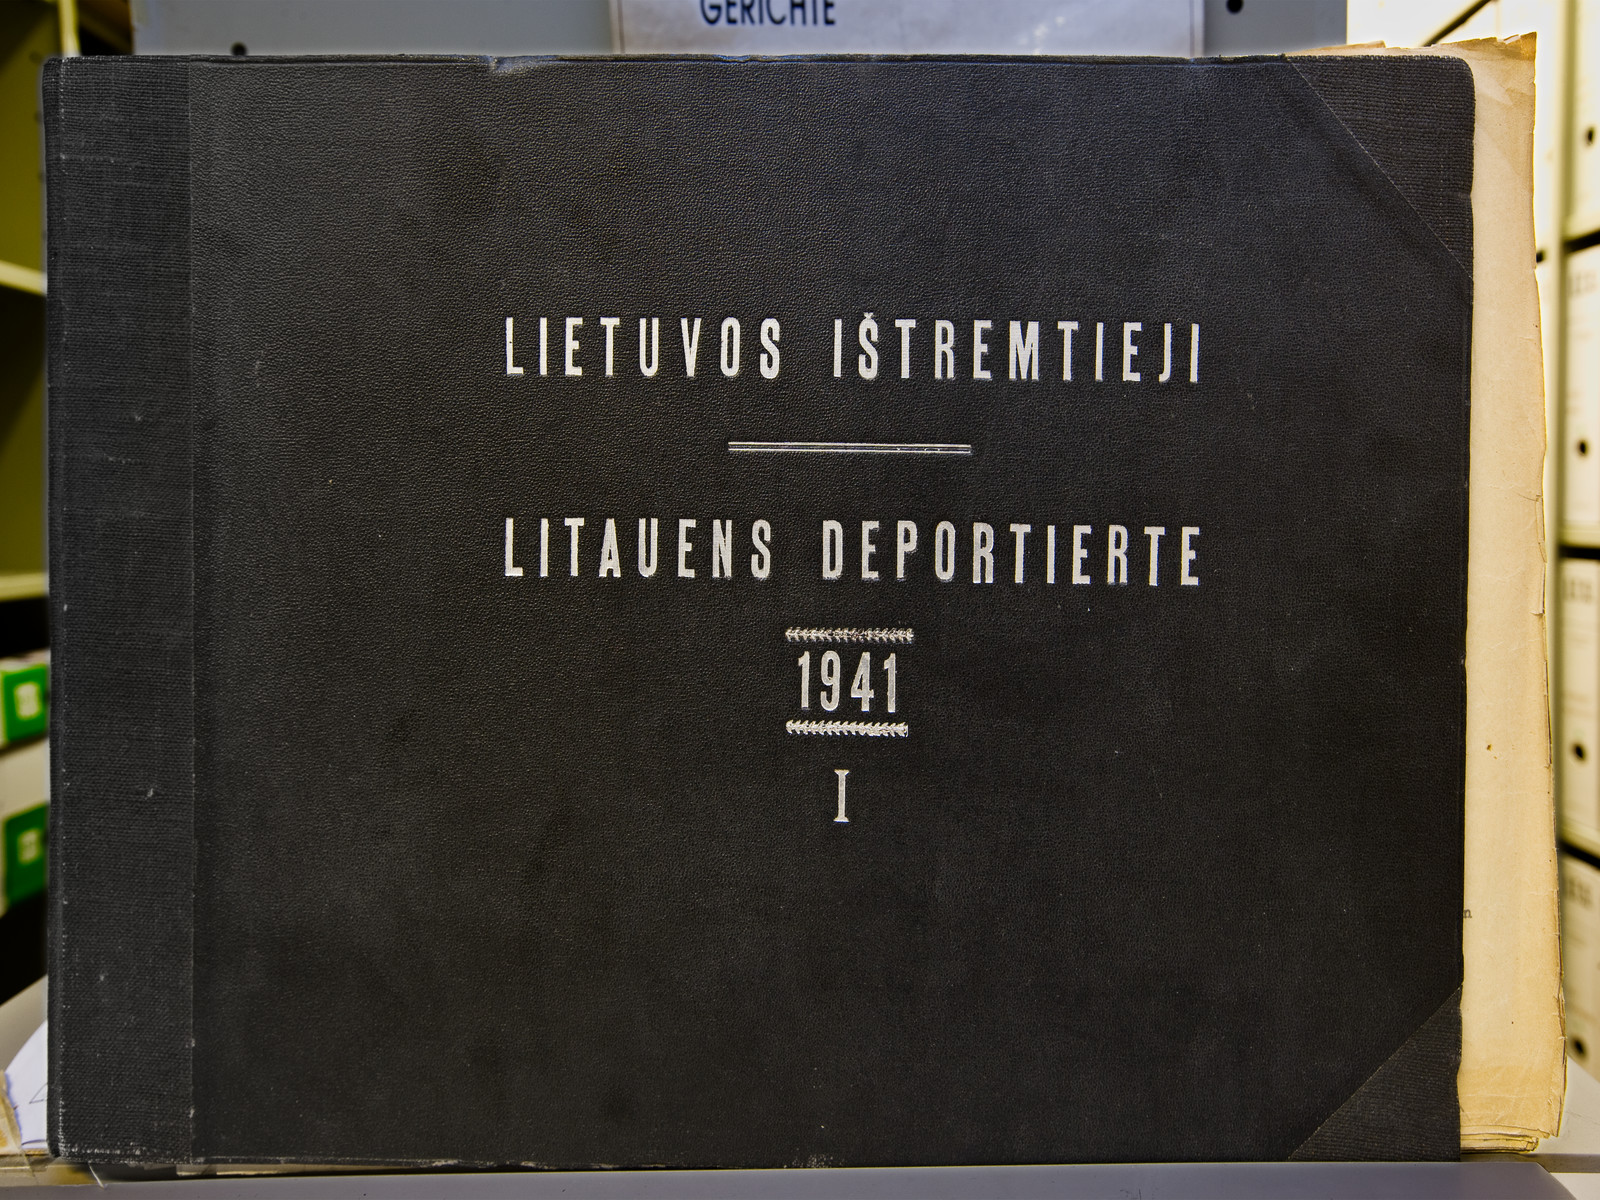 Front cover of I.T.S. Lithuanian deportation book of 1941.